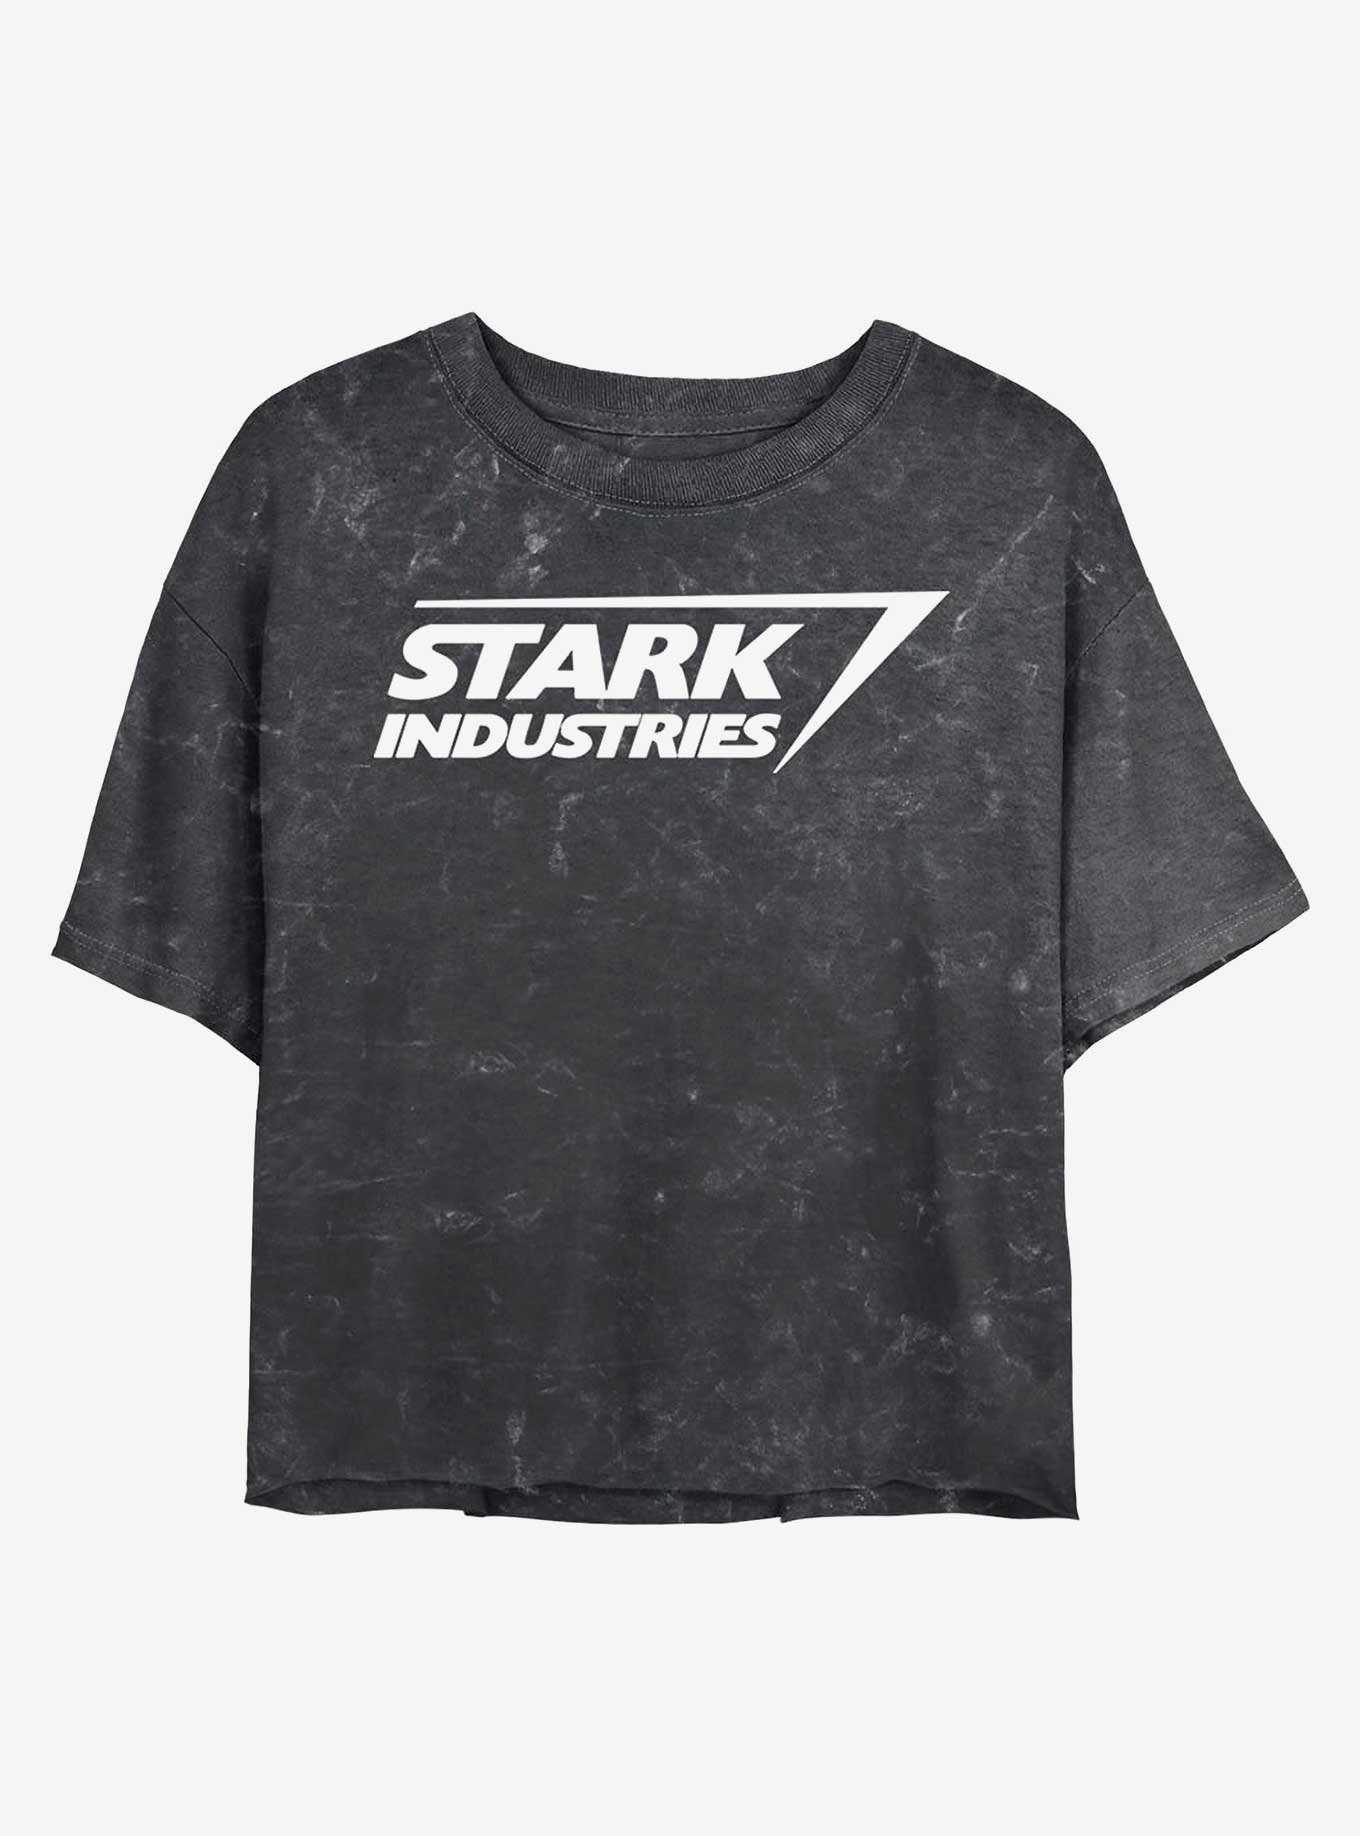 OFFICIAL Iron Man T-Shirts & Merchandise | Hot Topic